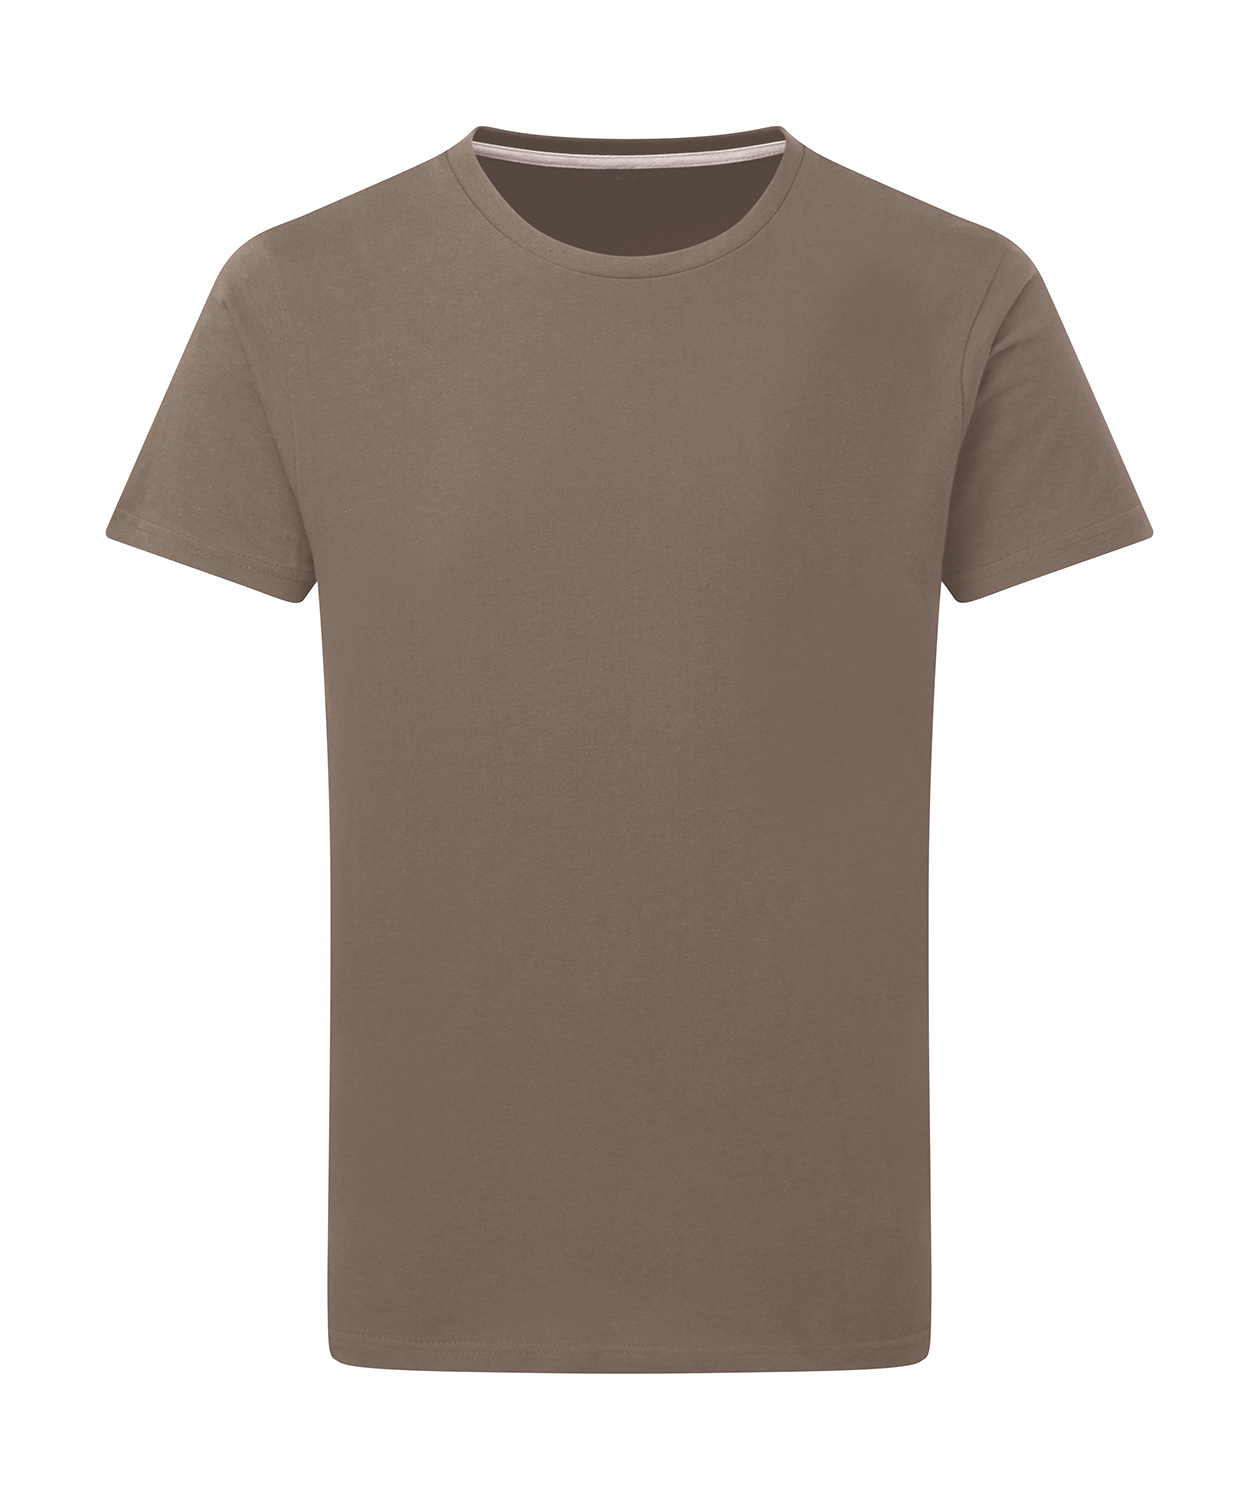 Comme j'aime Deep Taupe